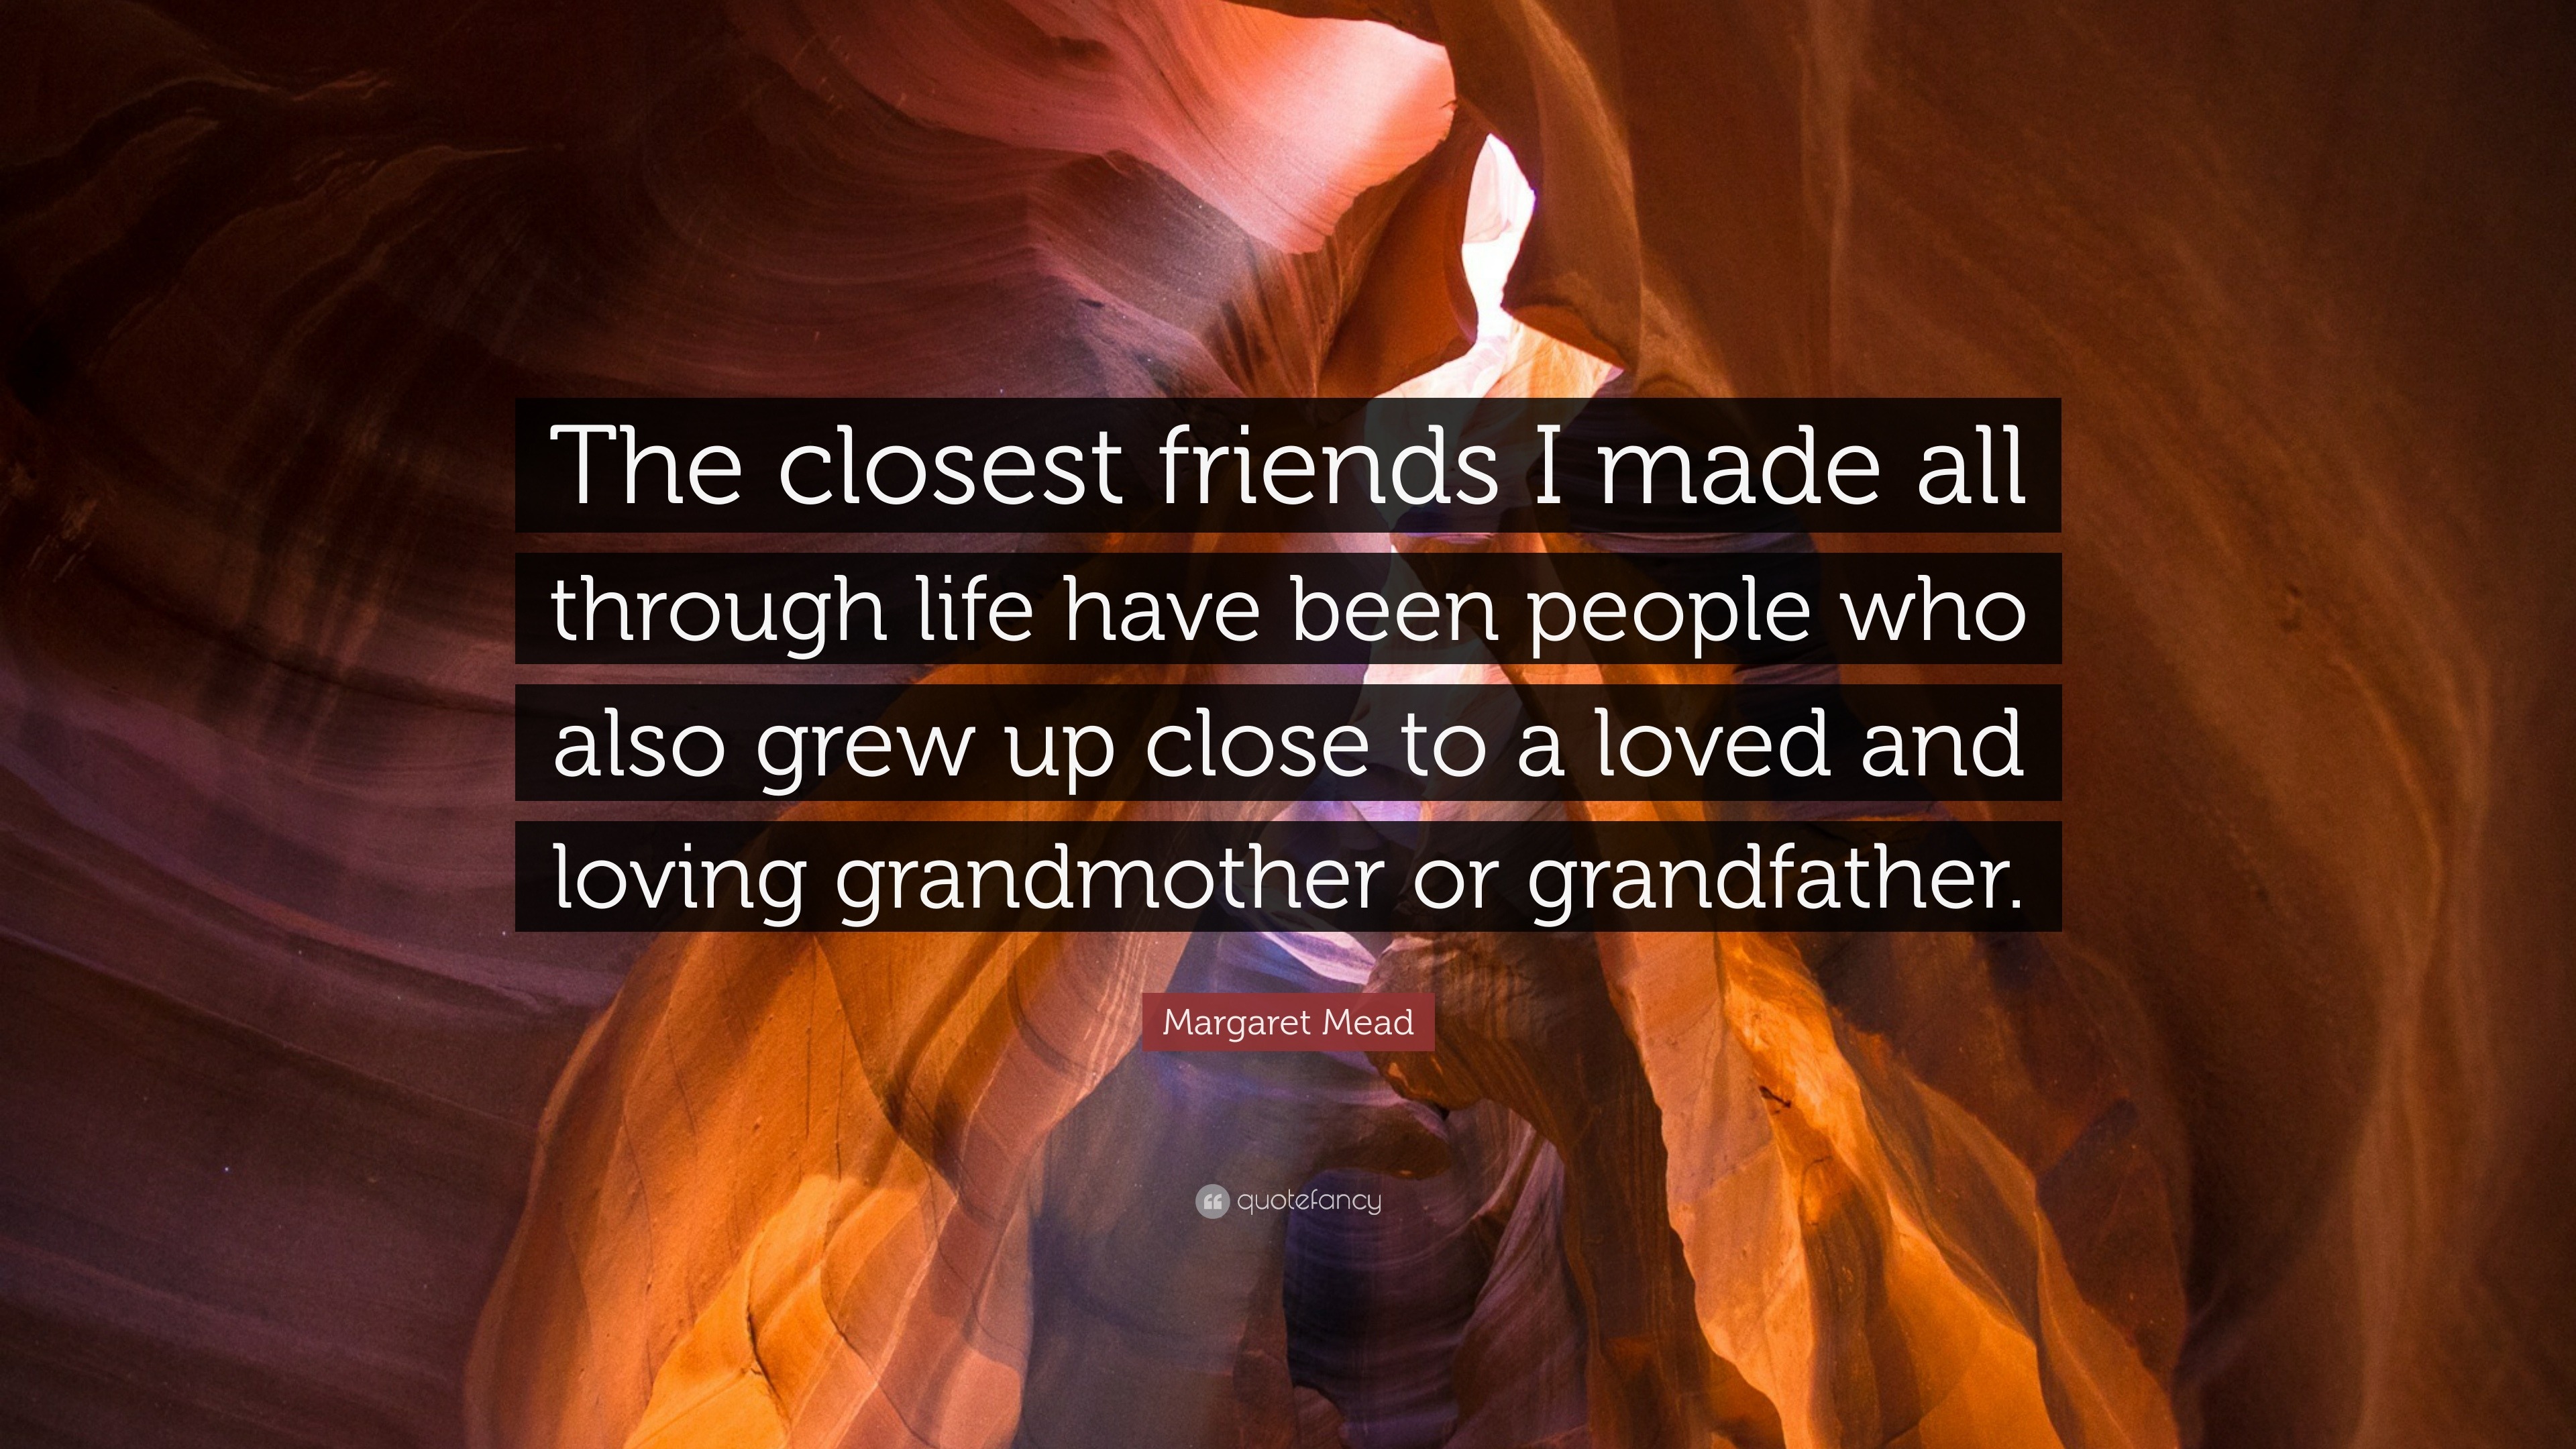 60 Quotes That Prove Why Friendship Matters, Inspirationfeed